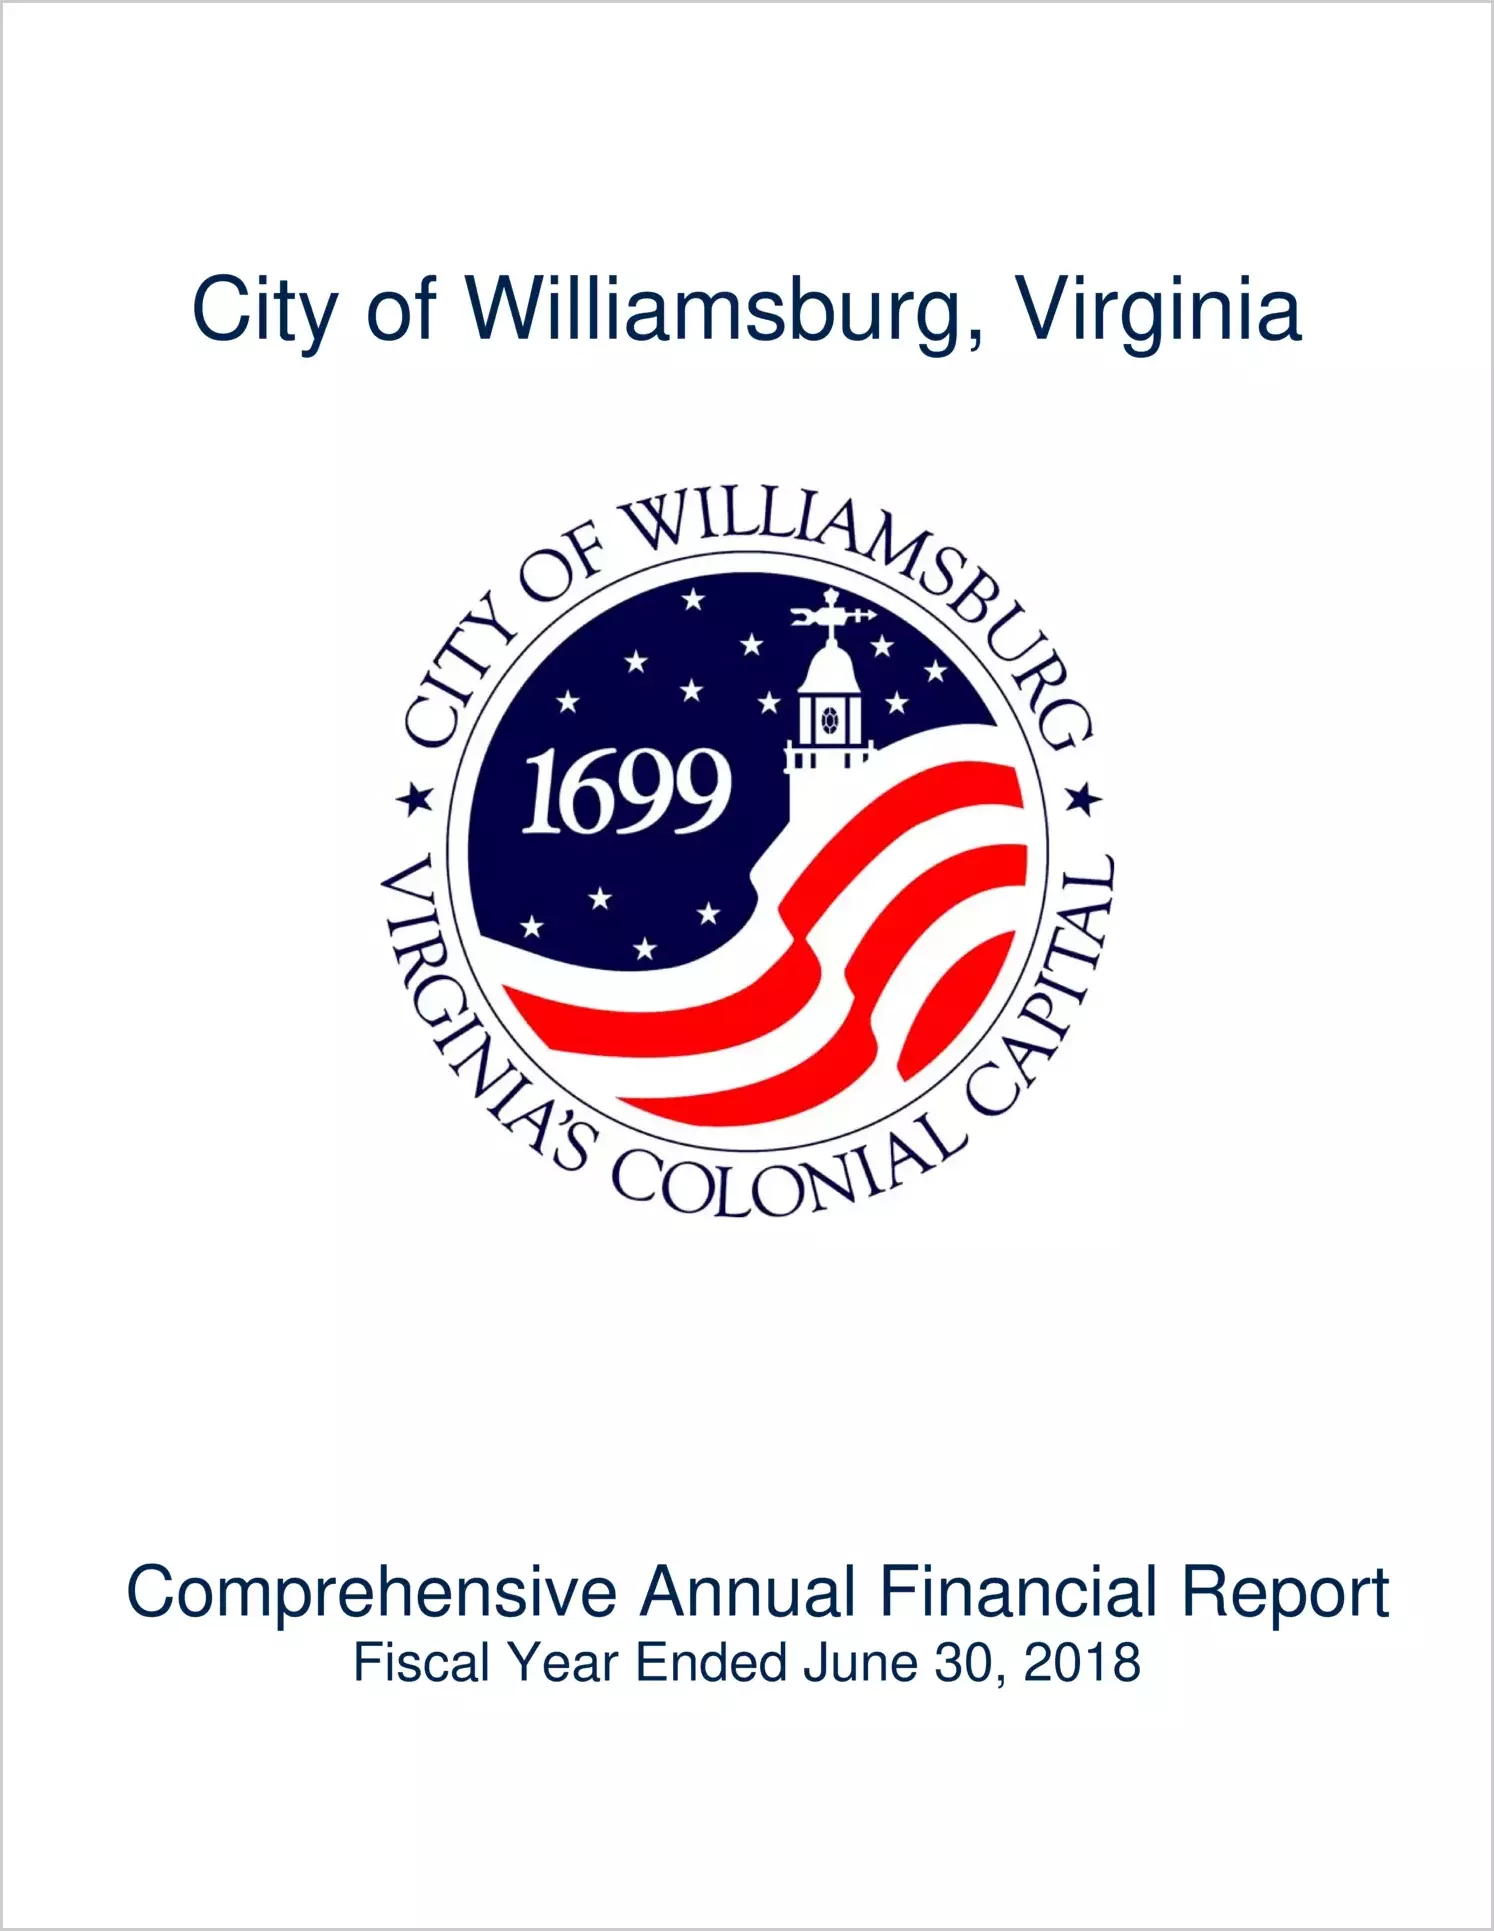 2018 Annual Financial Report for City of Williamsburg